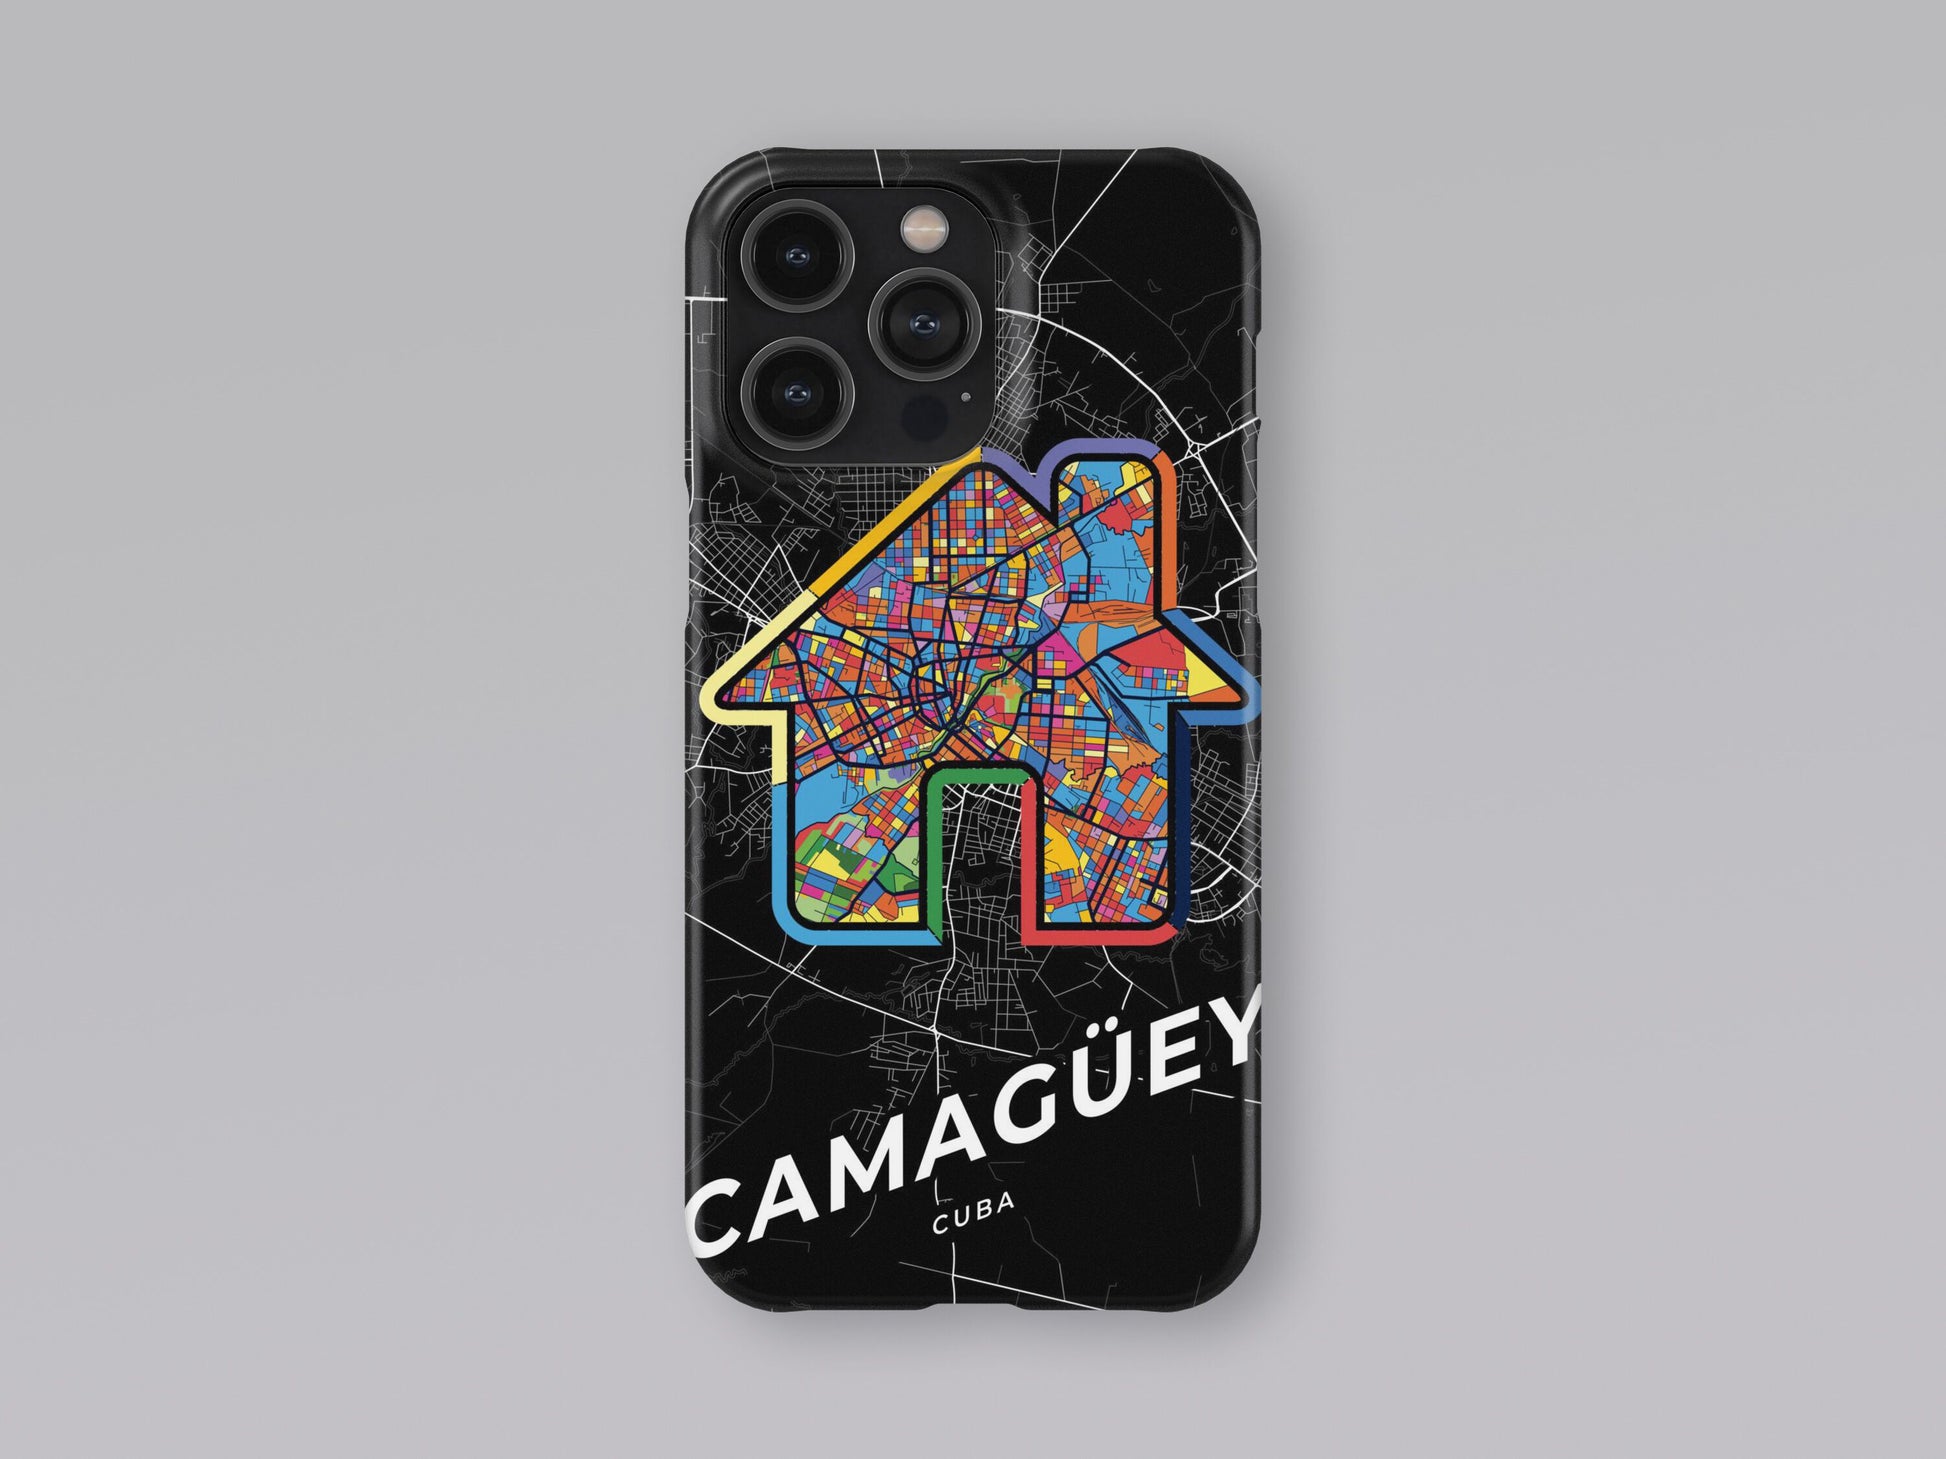 Camagüey Cuba slim phone case with colorful icon. Birthday, wedding or housewarming gift. Couple match cases. 3